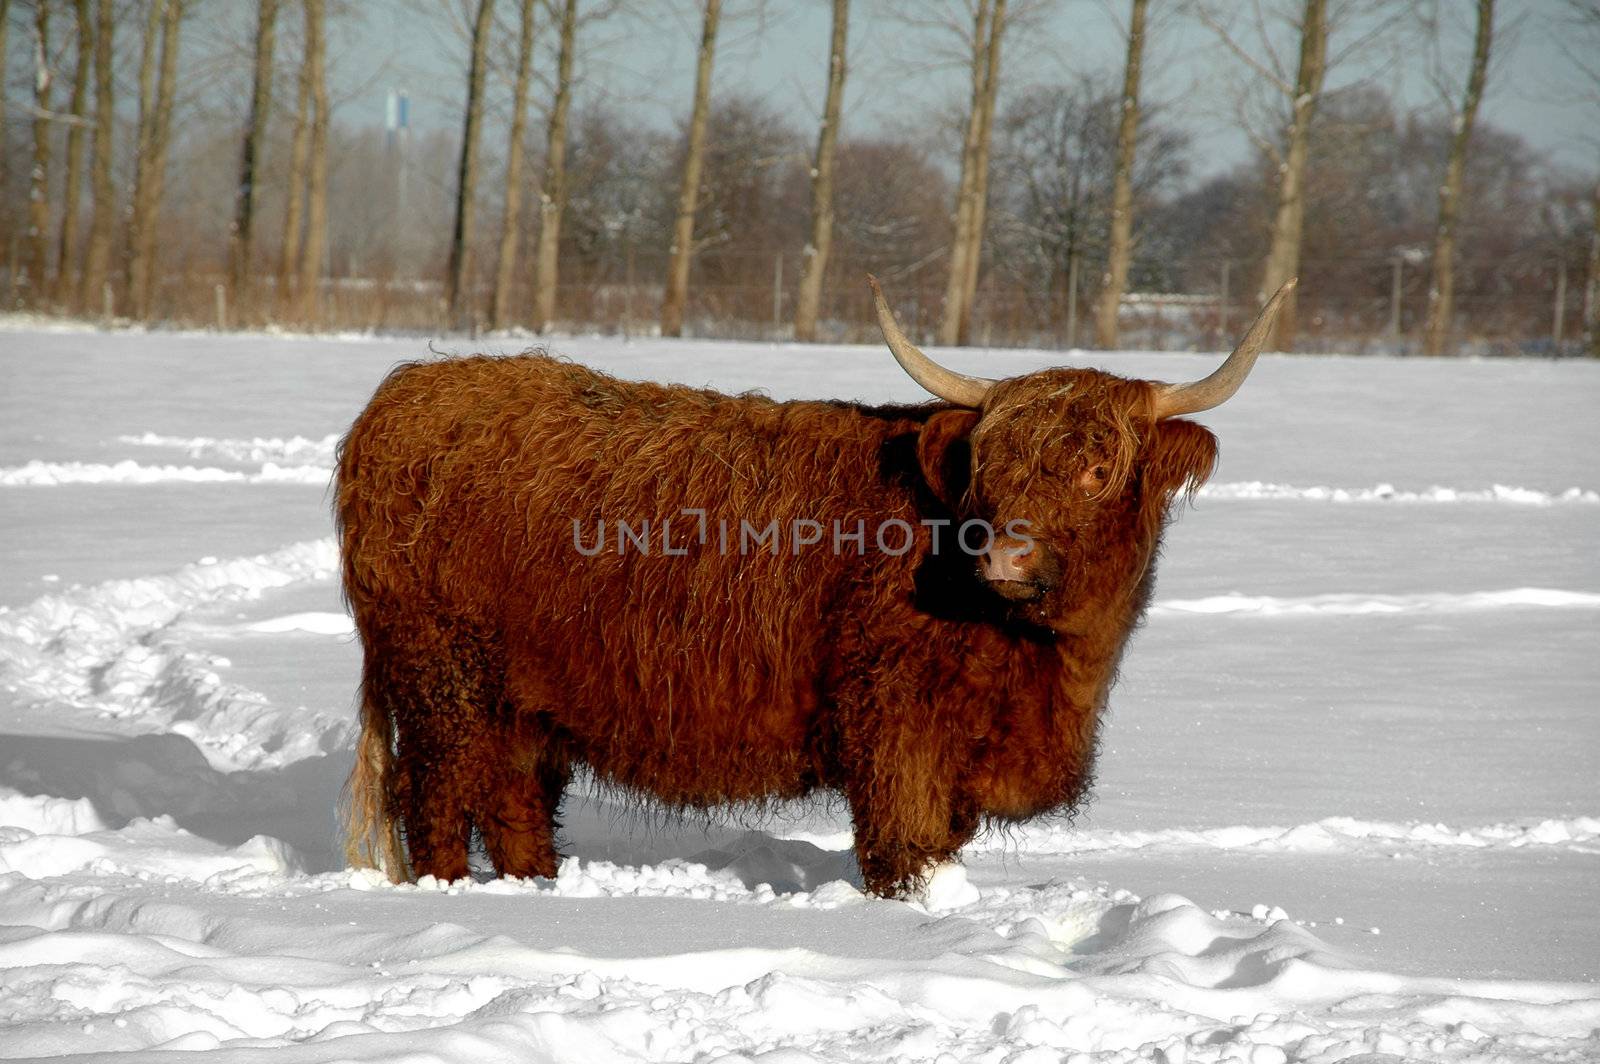 Cow is standing in the cold snow